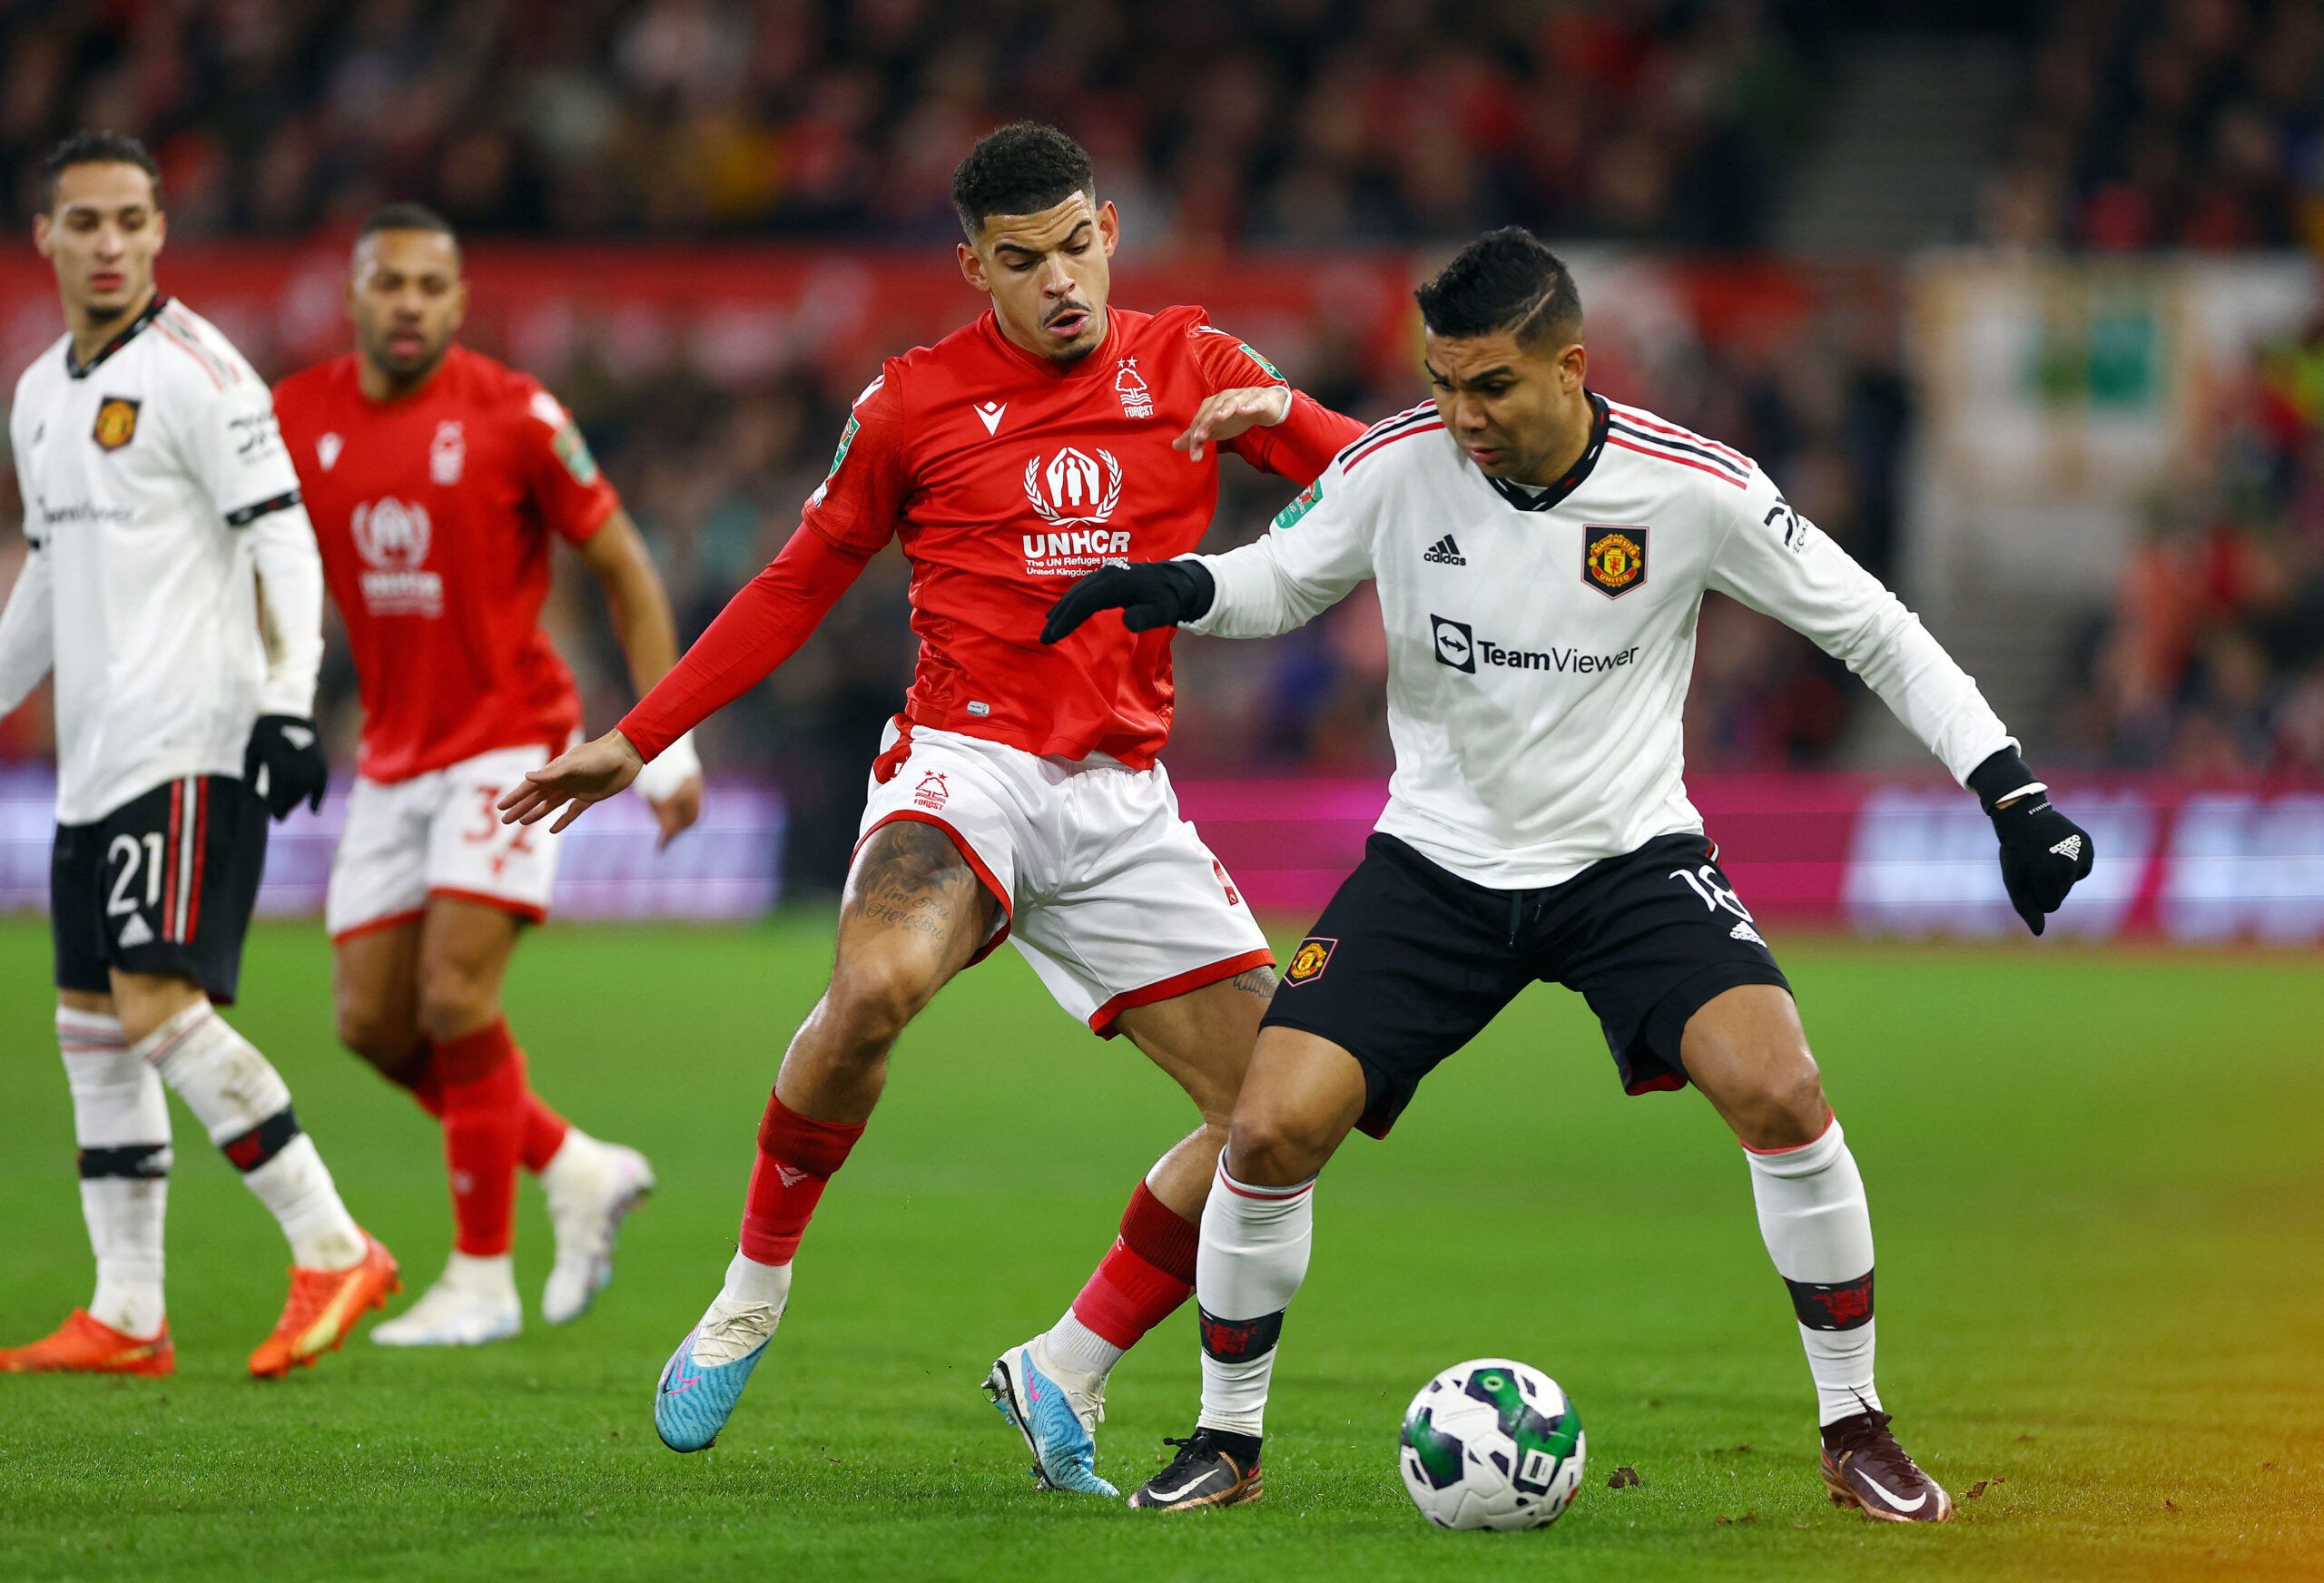 Soccer Football - Carabao Cup - Semi Final - First Leg - Nottingham Forest v Manchester United - The City Ground, Nottingham, Britain - January 25, 2023 Nottingham Forest's Morgan Gibbs-White in action with Manchester United's Casemiro REUTERS/Molly Darlington